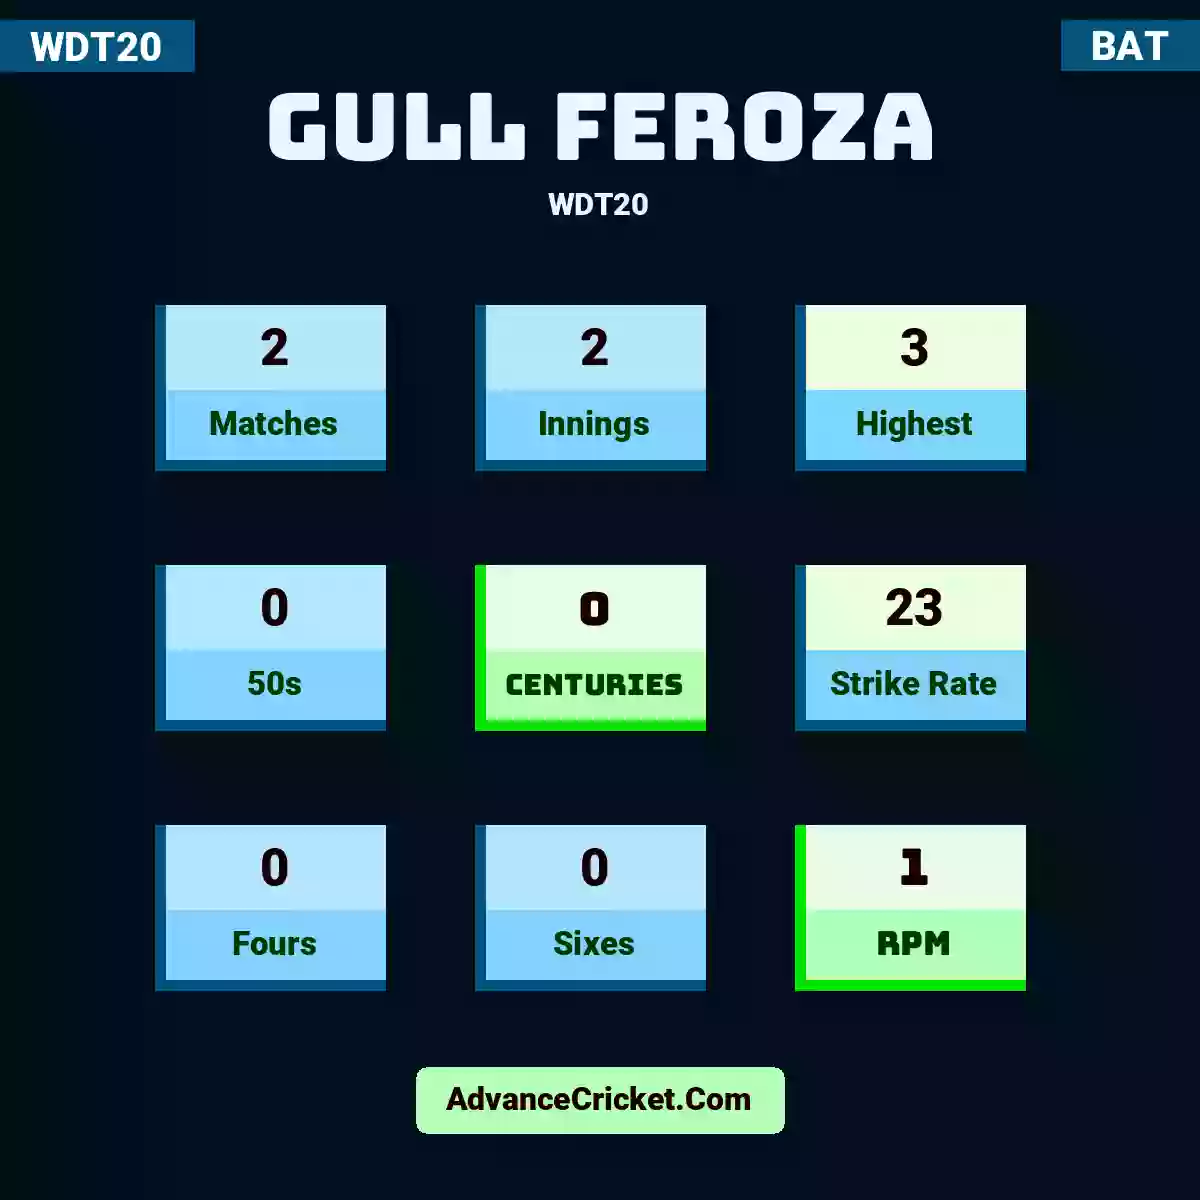 Gull Feroza WDT20 , Gull Feroza played 2 matches, scored 3 runs as highest, 0 half-centuries, and 0 centuries, with a strike rate of 23. G.Feroza hit 0 fours and 0 sixes, with an RPM of 1.